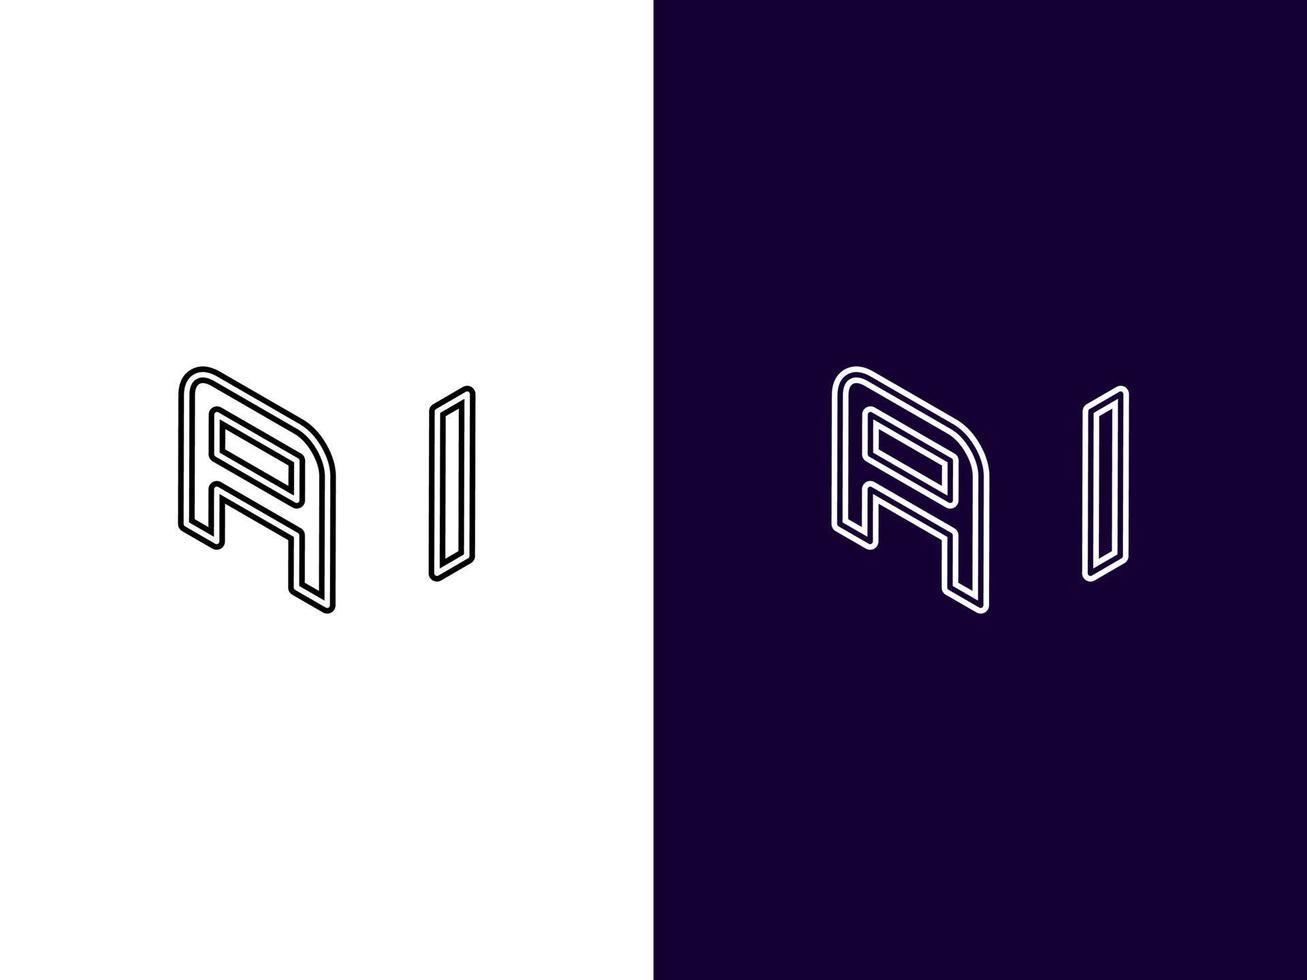 Initial letter AI minimalist and modern 3D logo design vector